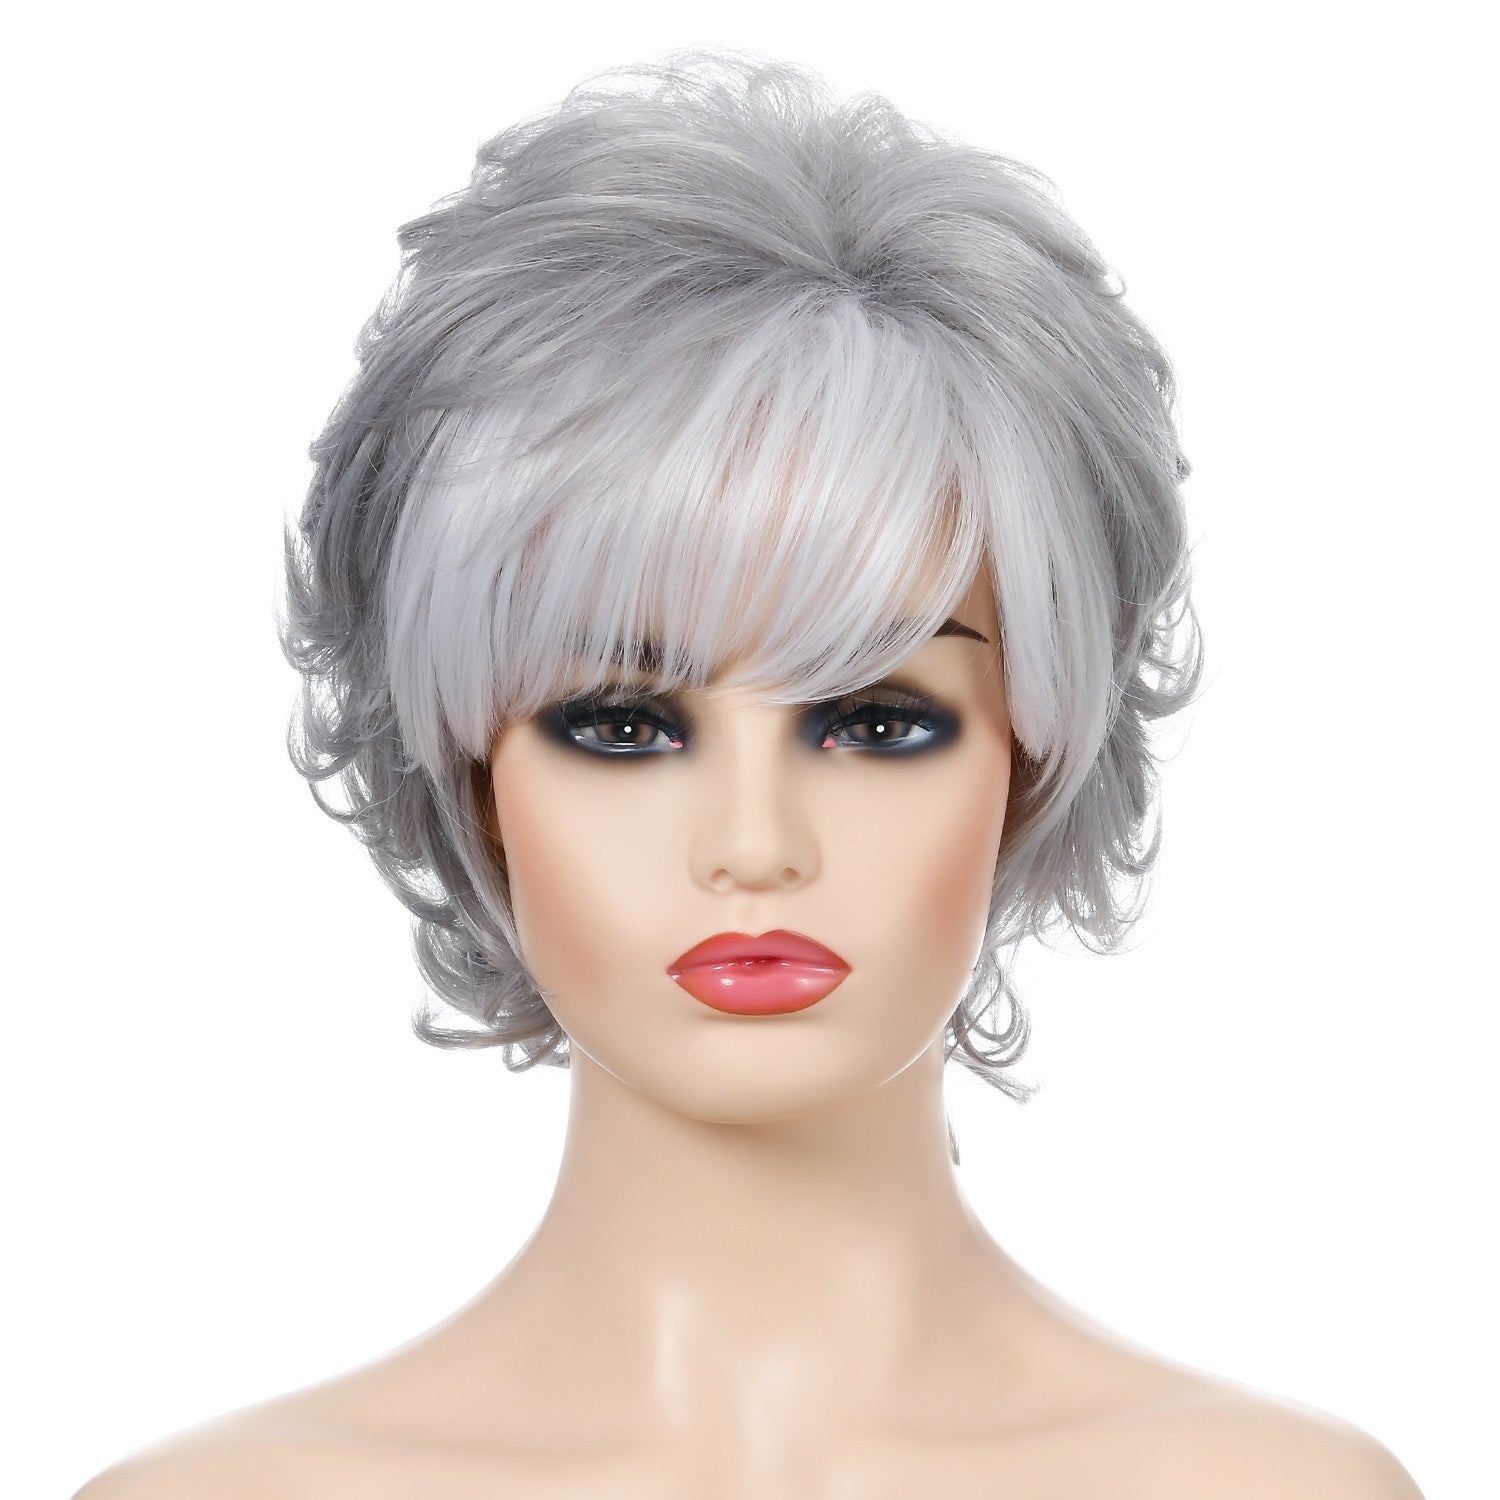 Tuesday | Grey Short Pixie Cut Wavy Synthetic Hair Wig With Bangs